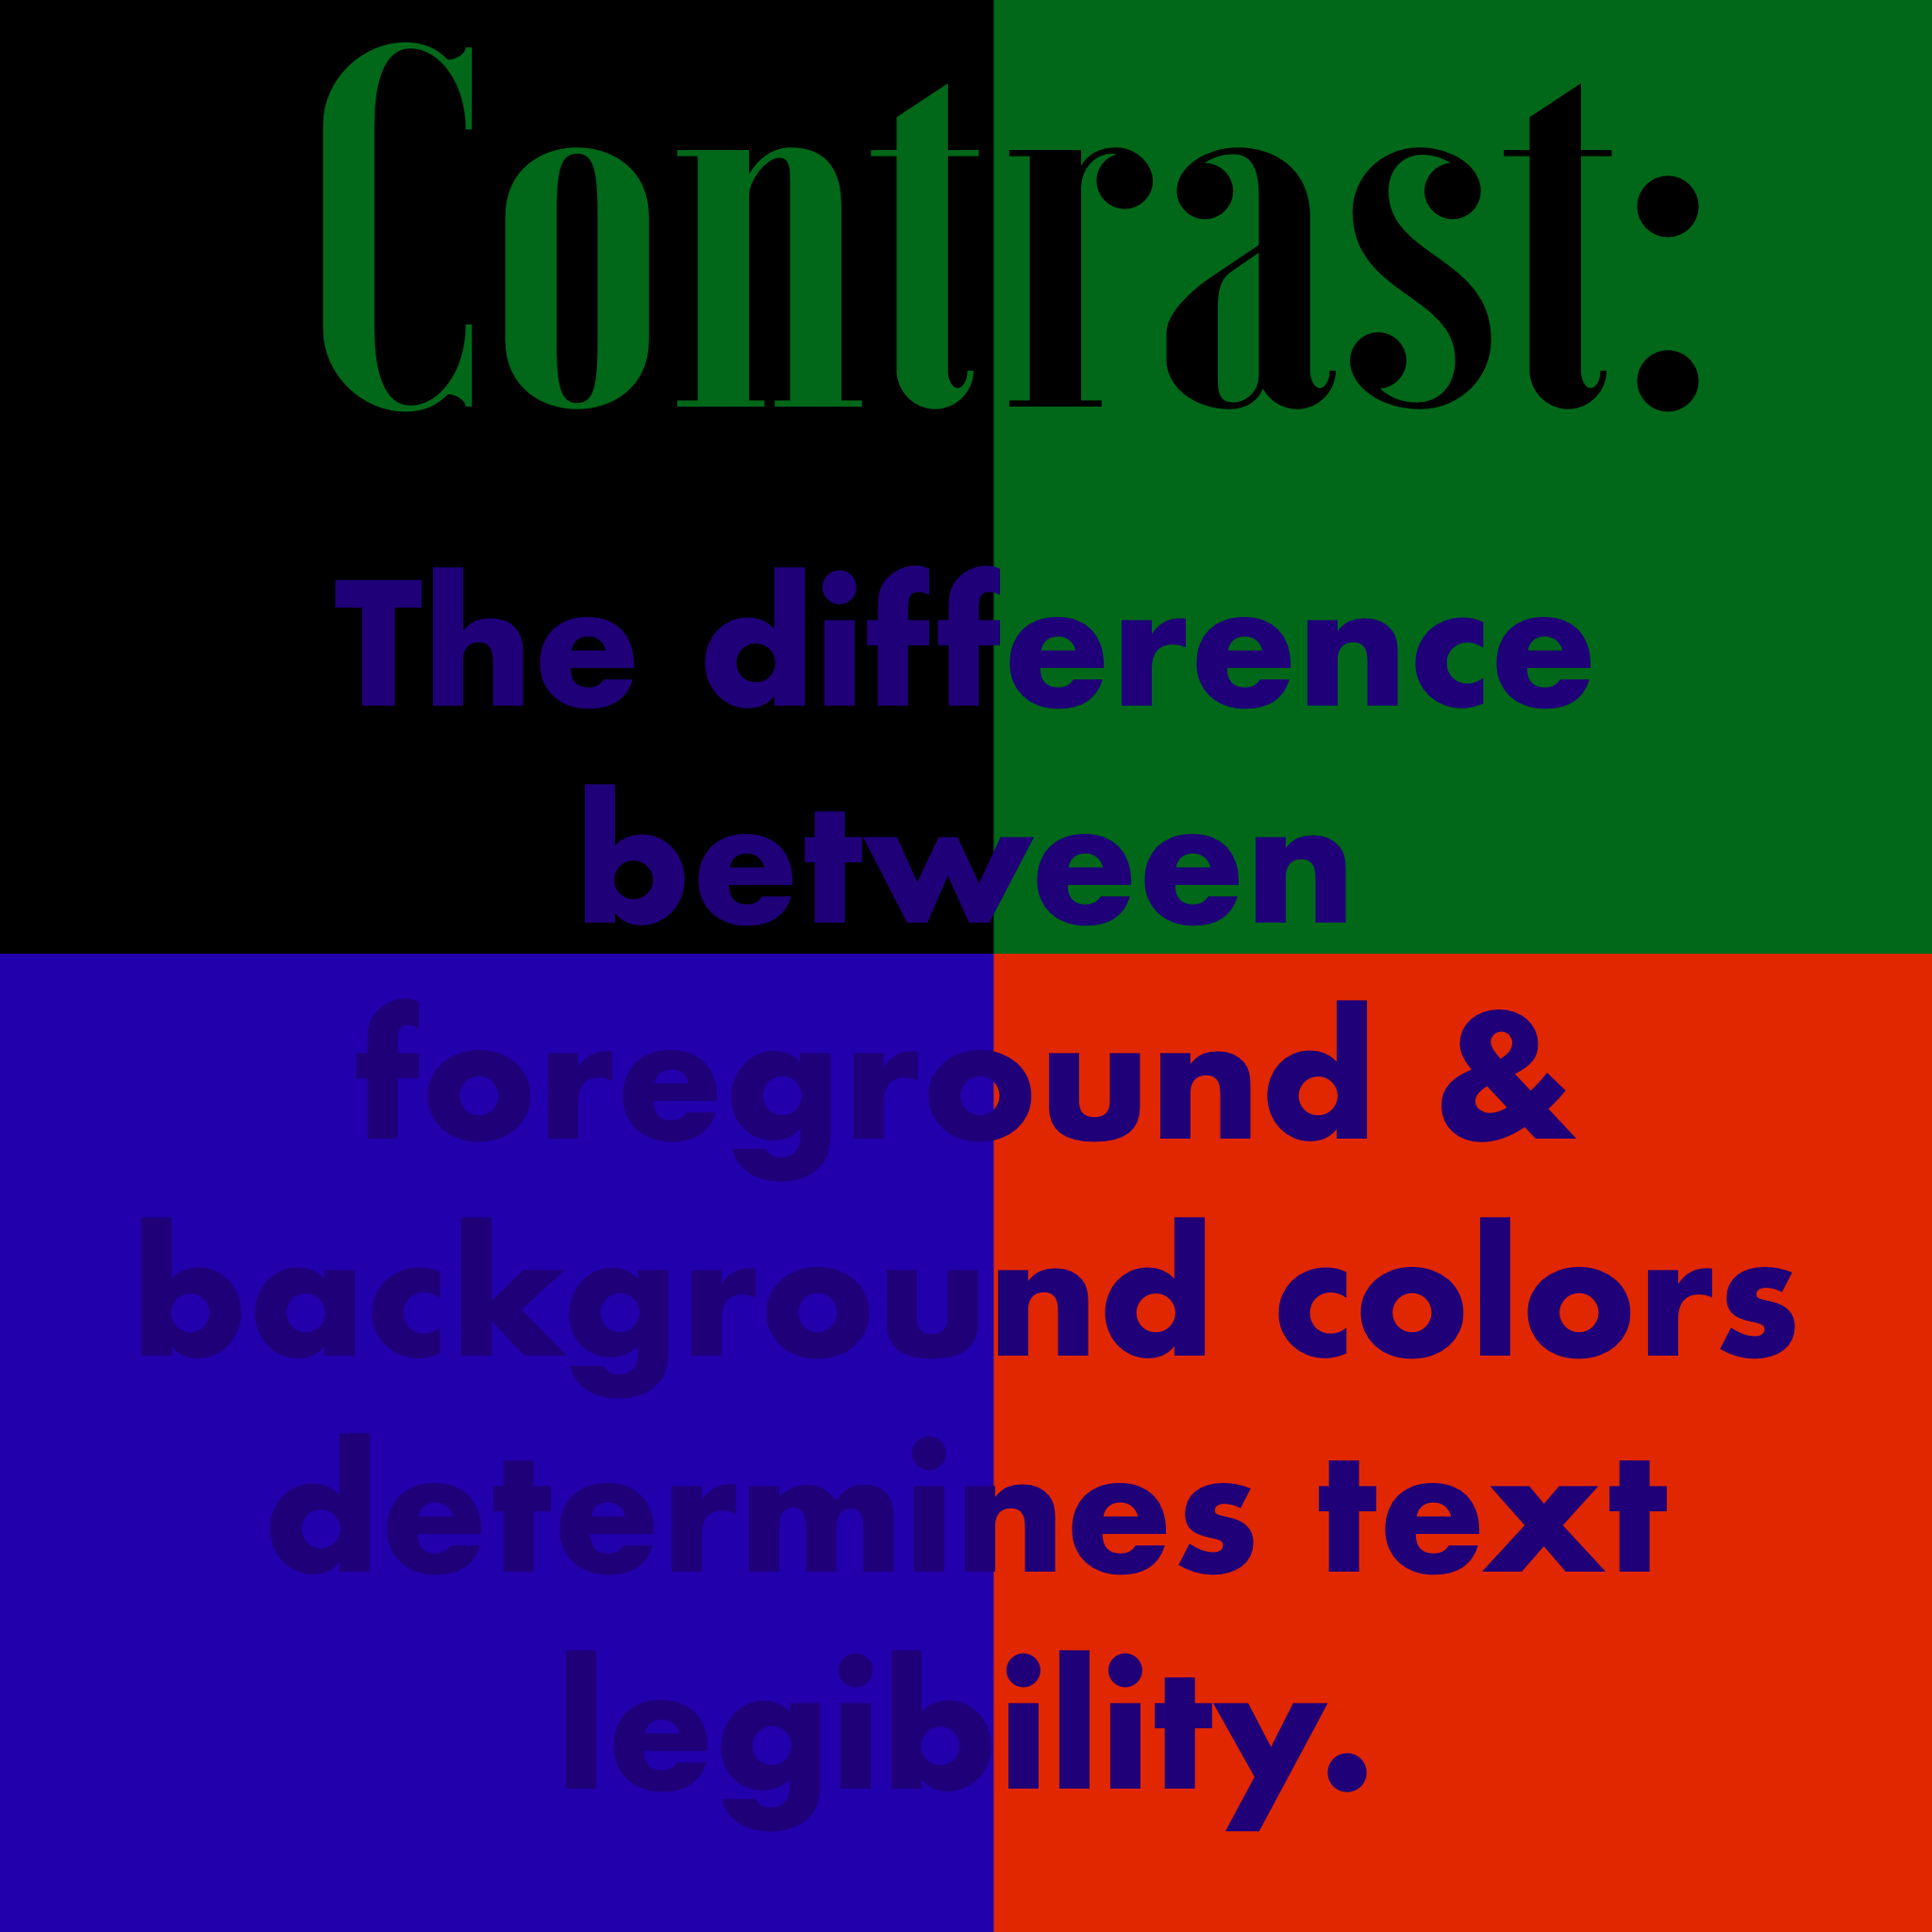 Example of different colored text on different colored backgrounds.